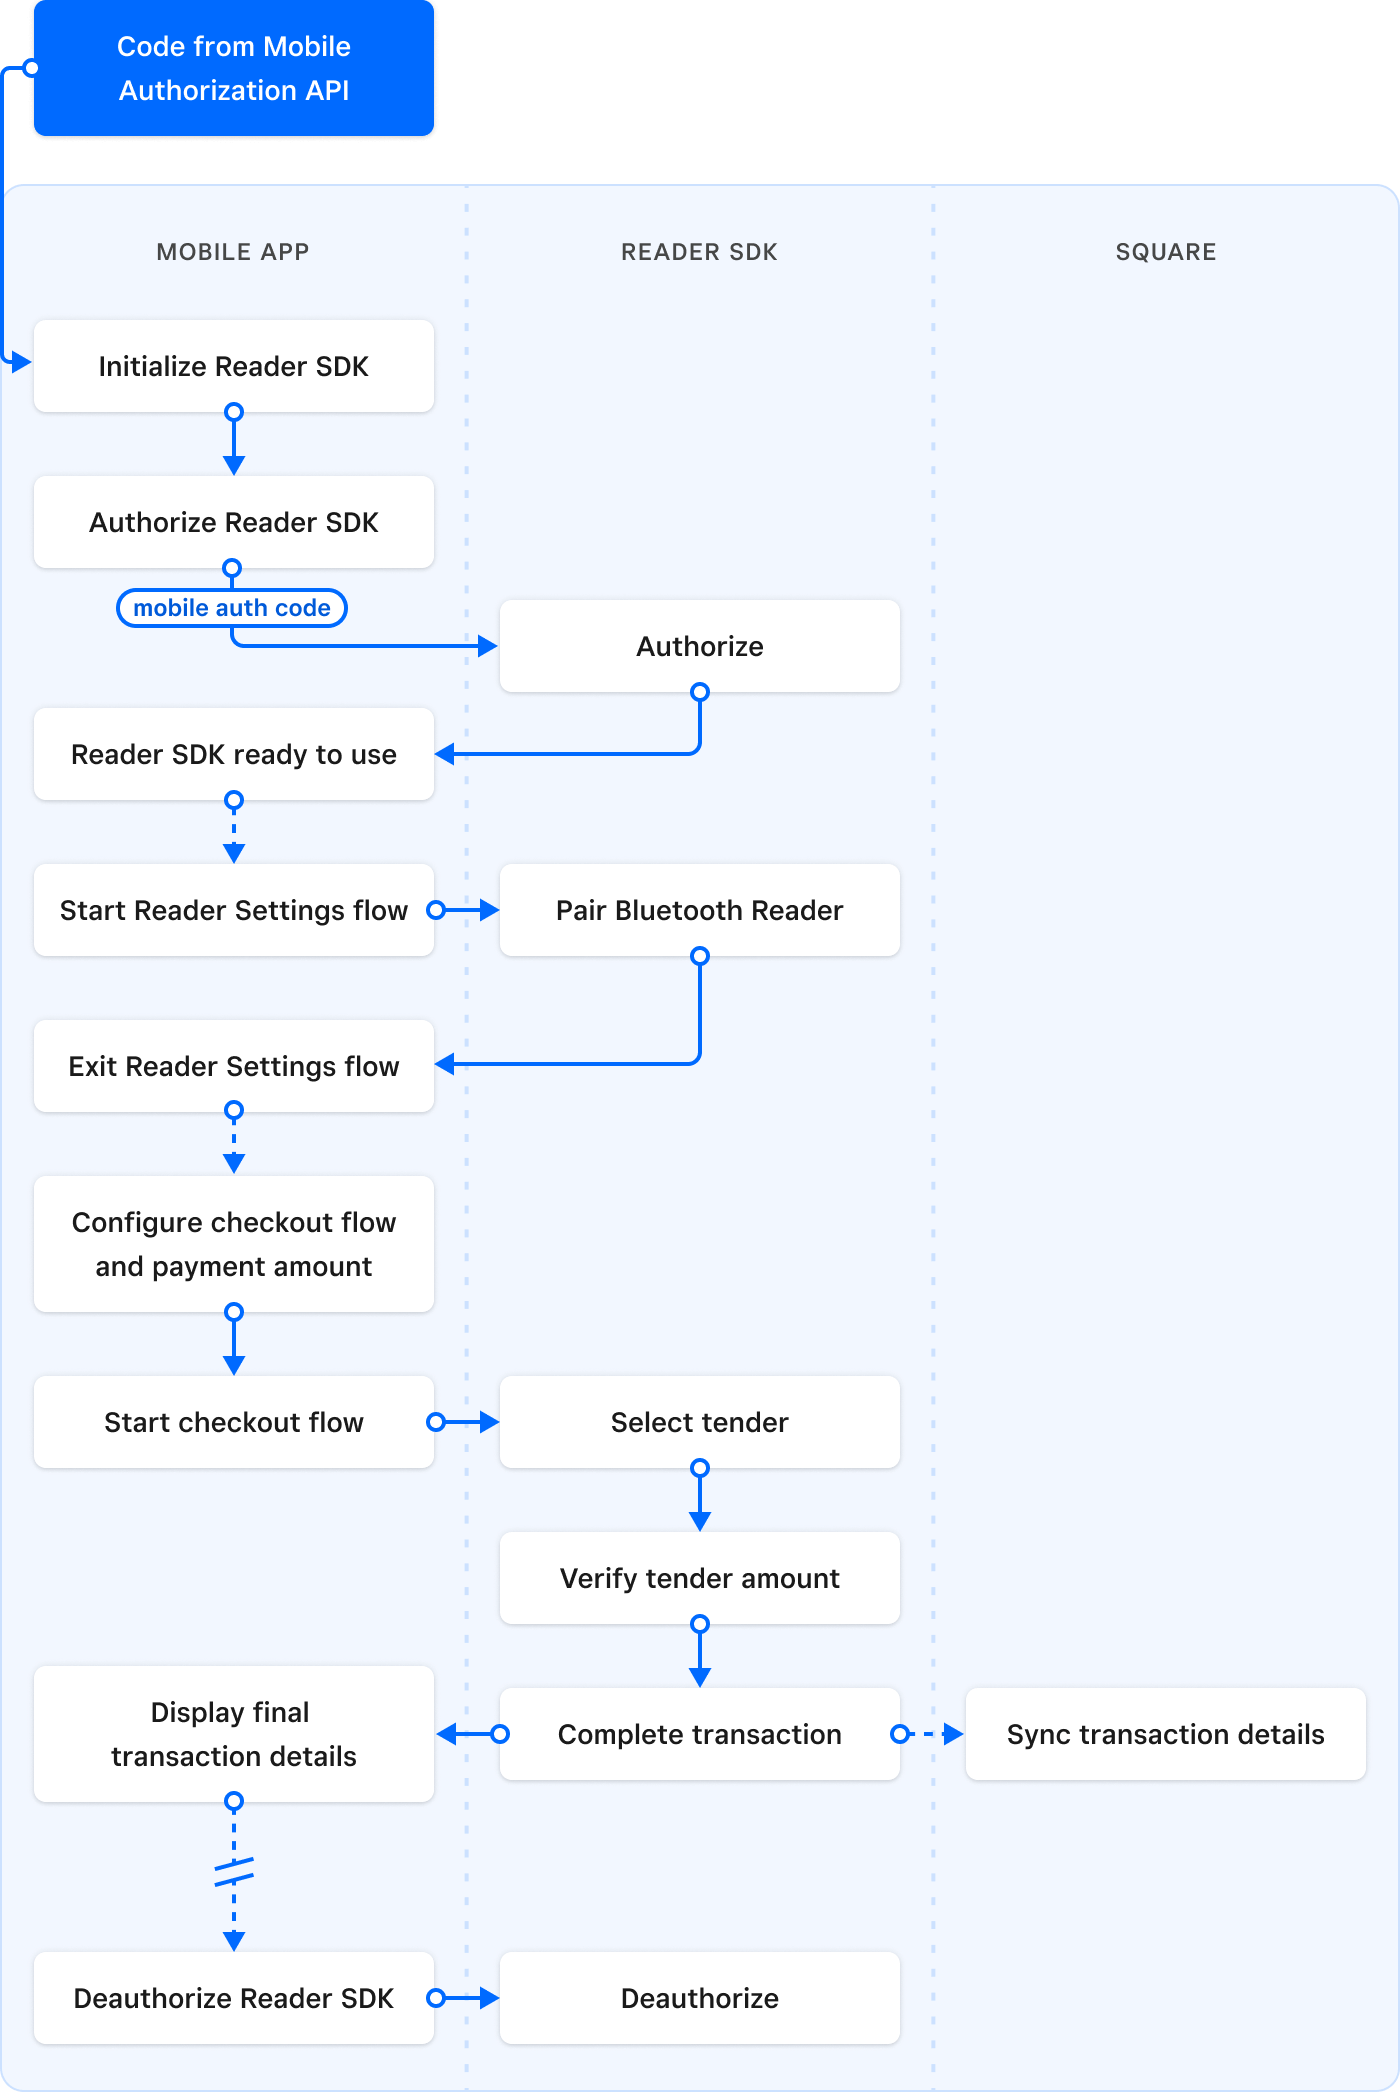 A diagram showing the mobile client to Square server process flow in the Reader SDK.